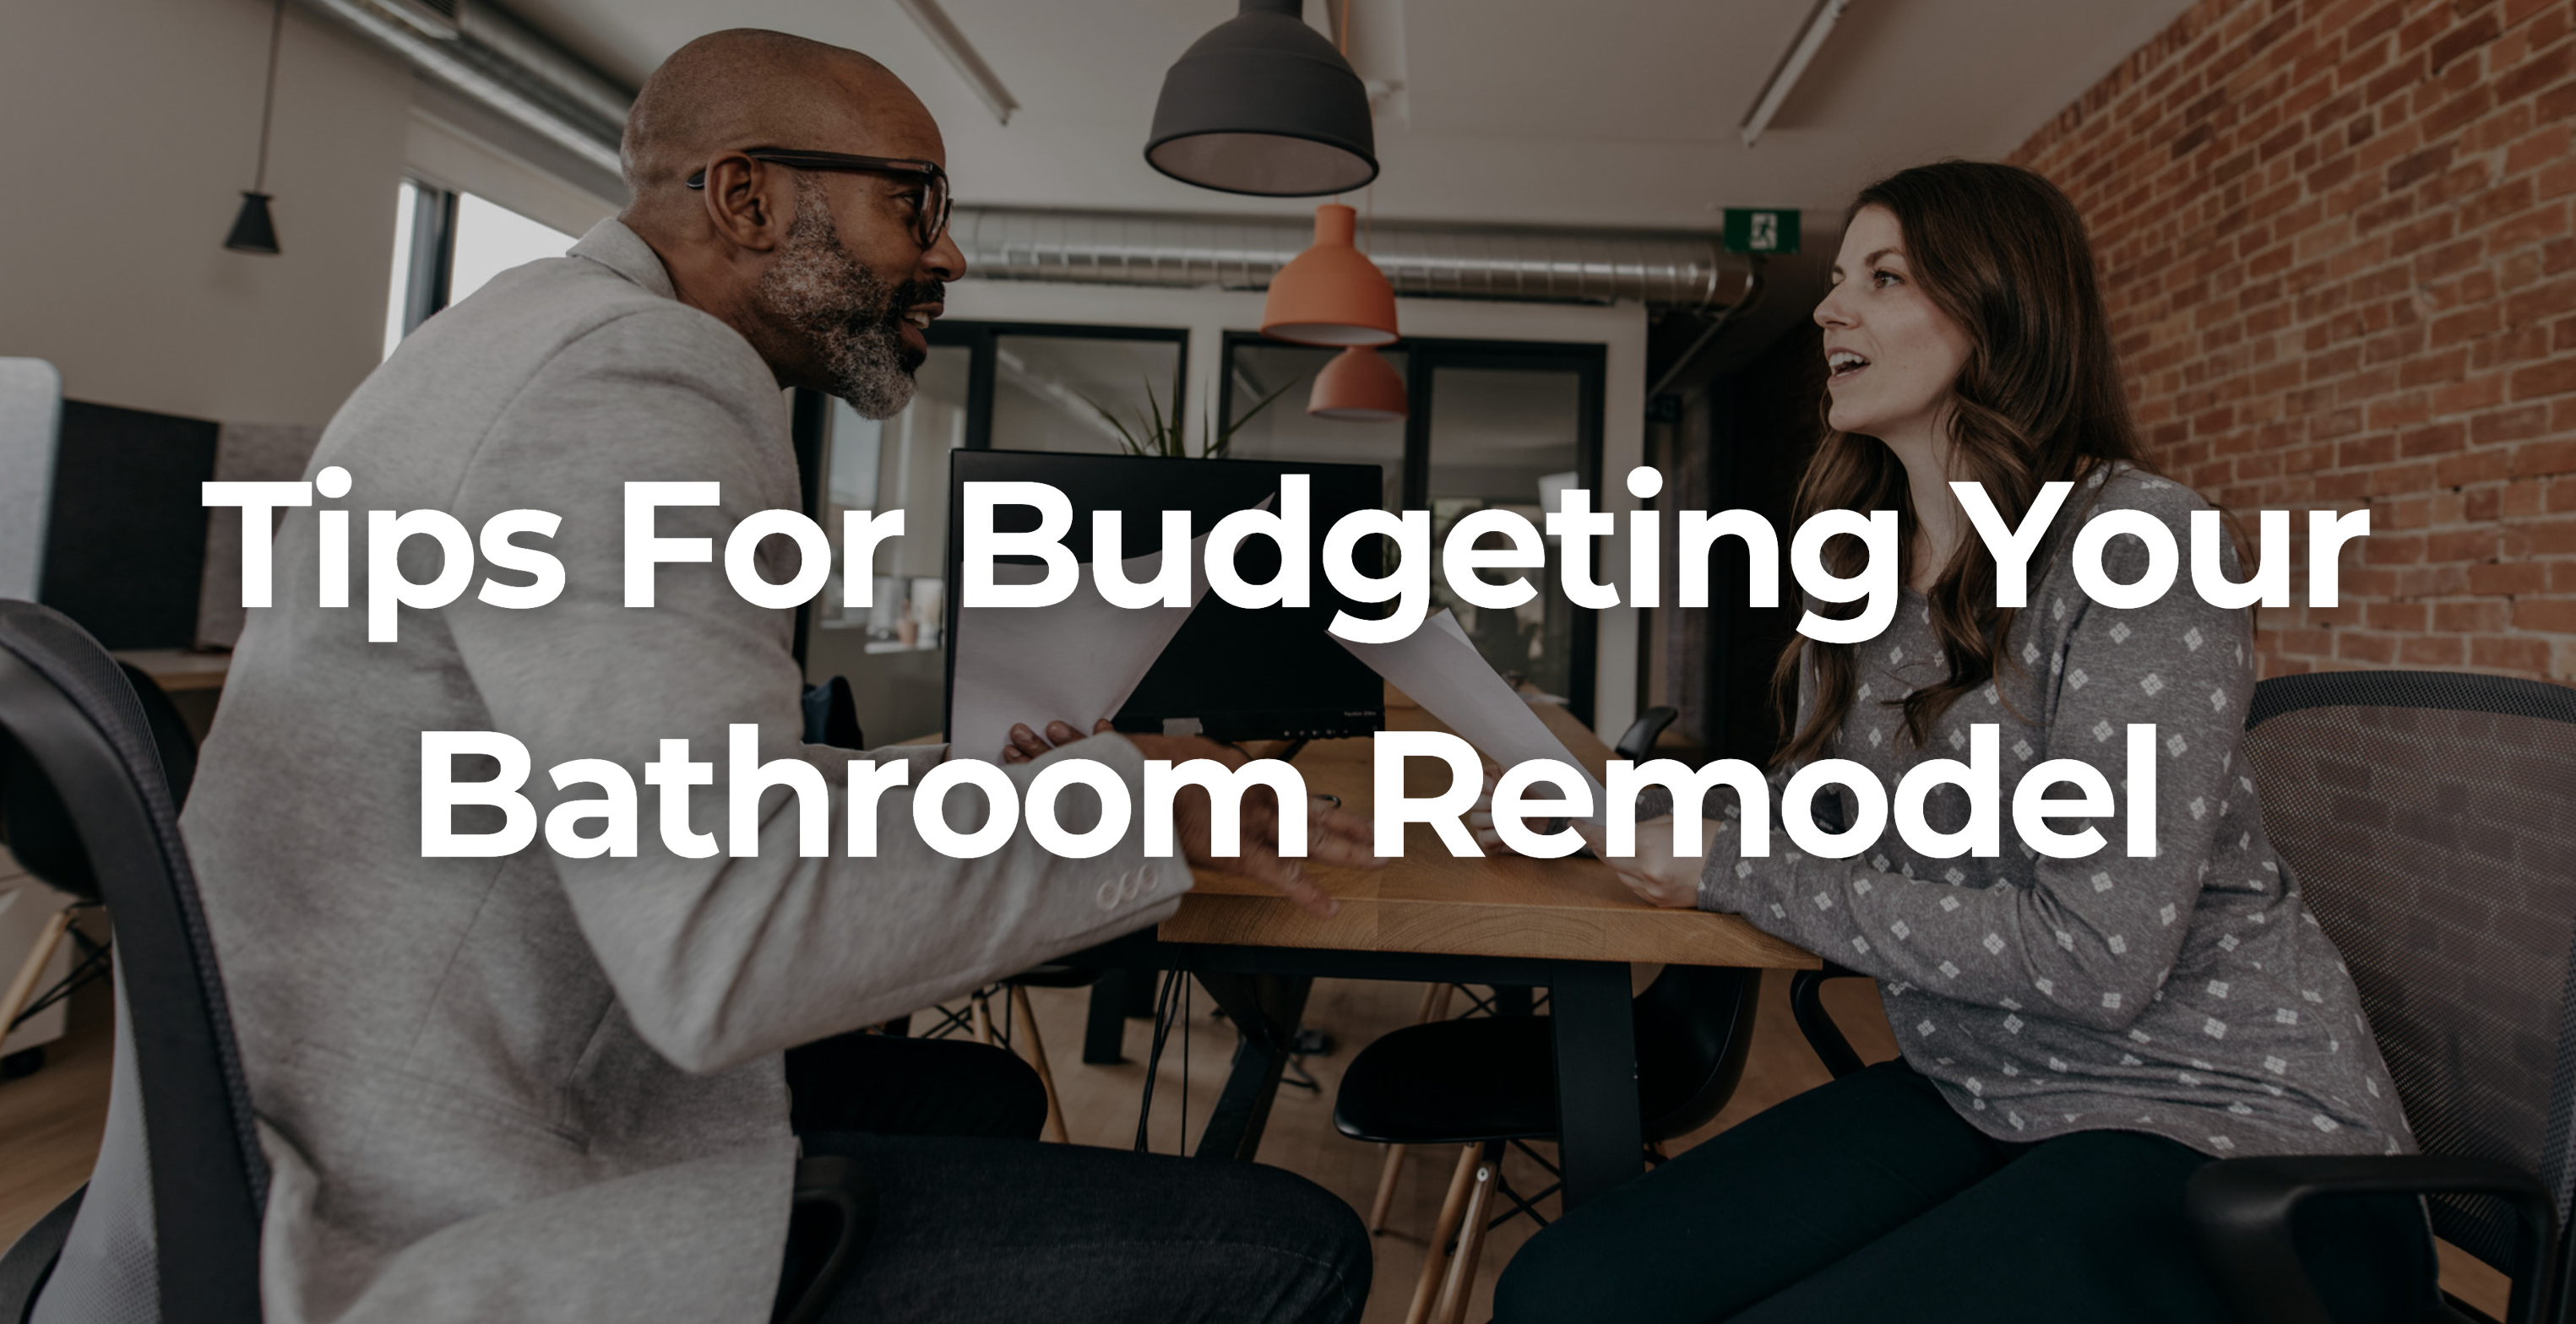 Tips For Budgeting Your Bathroom Remodel